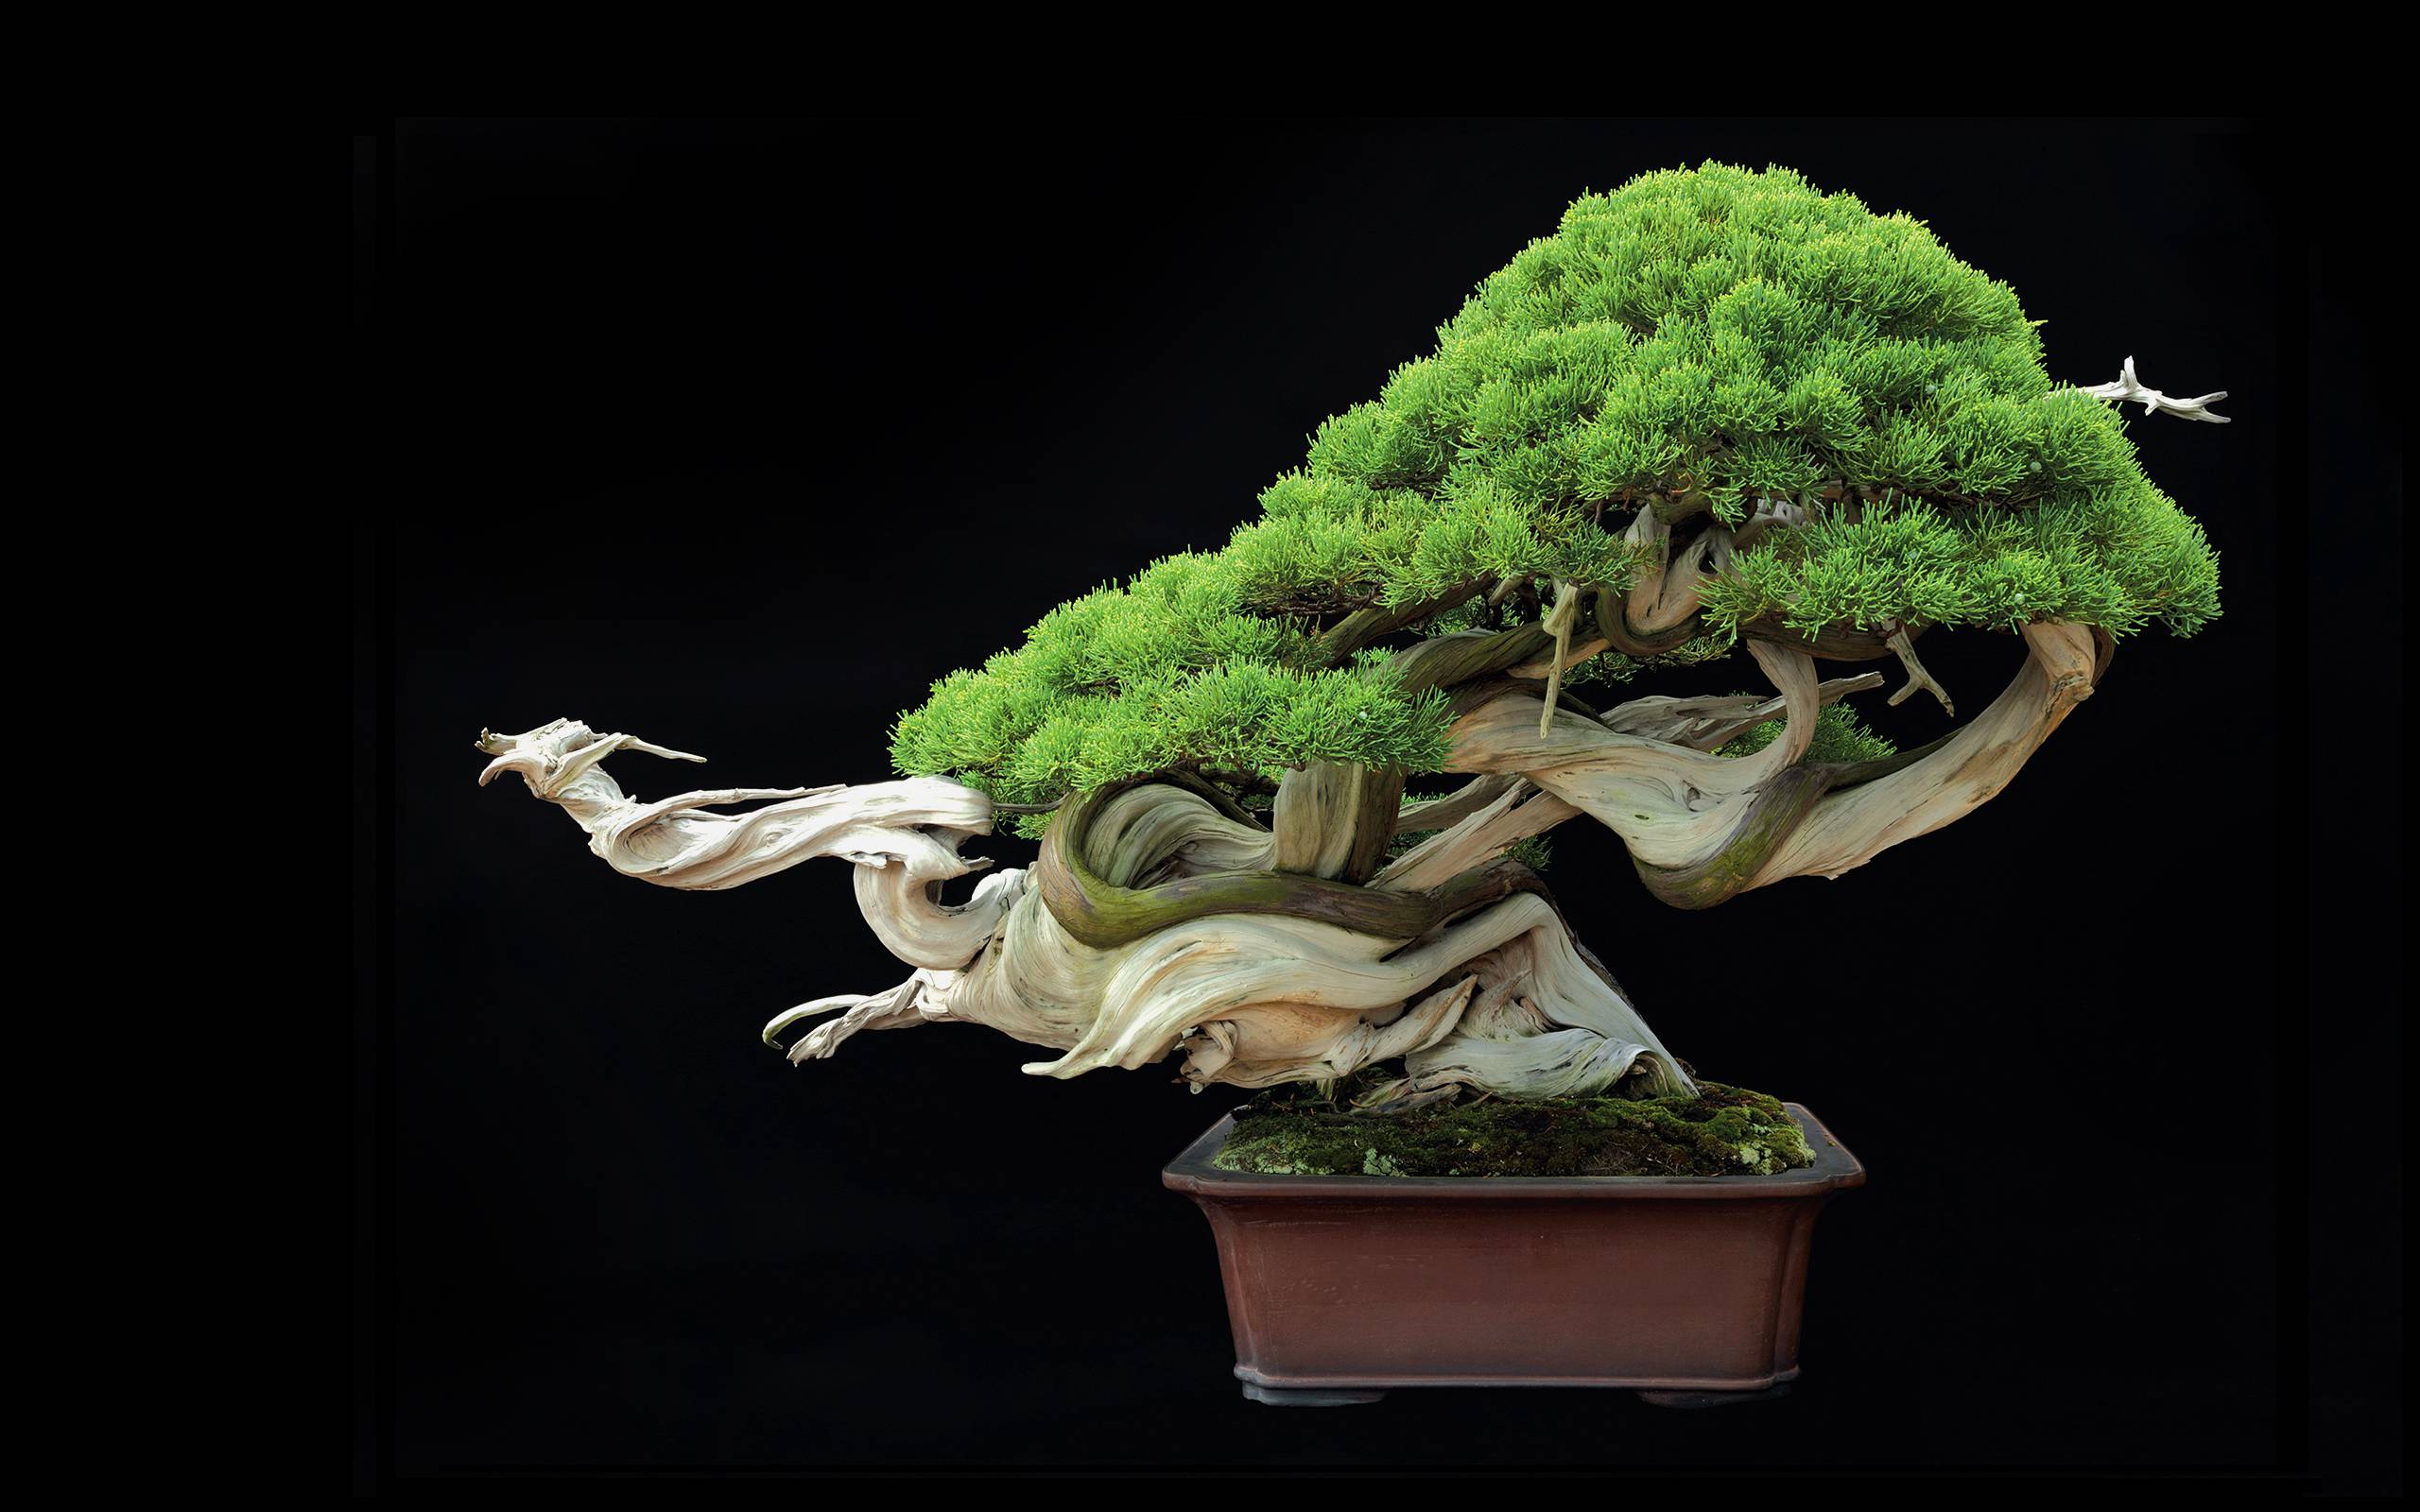 Best Cool Bonsai Tree in the world Learn more here 